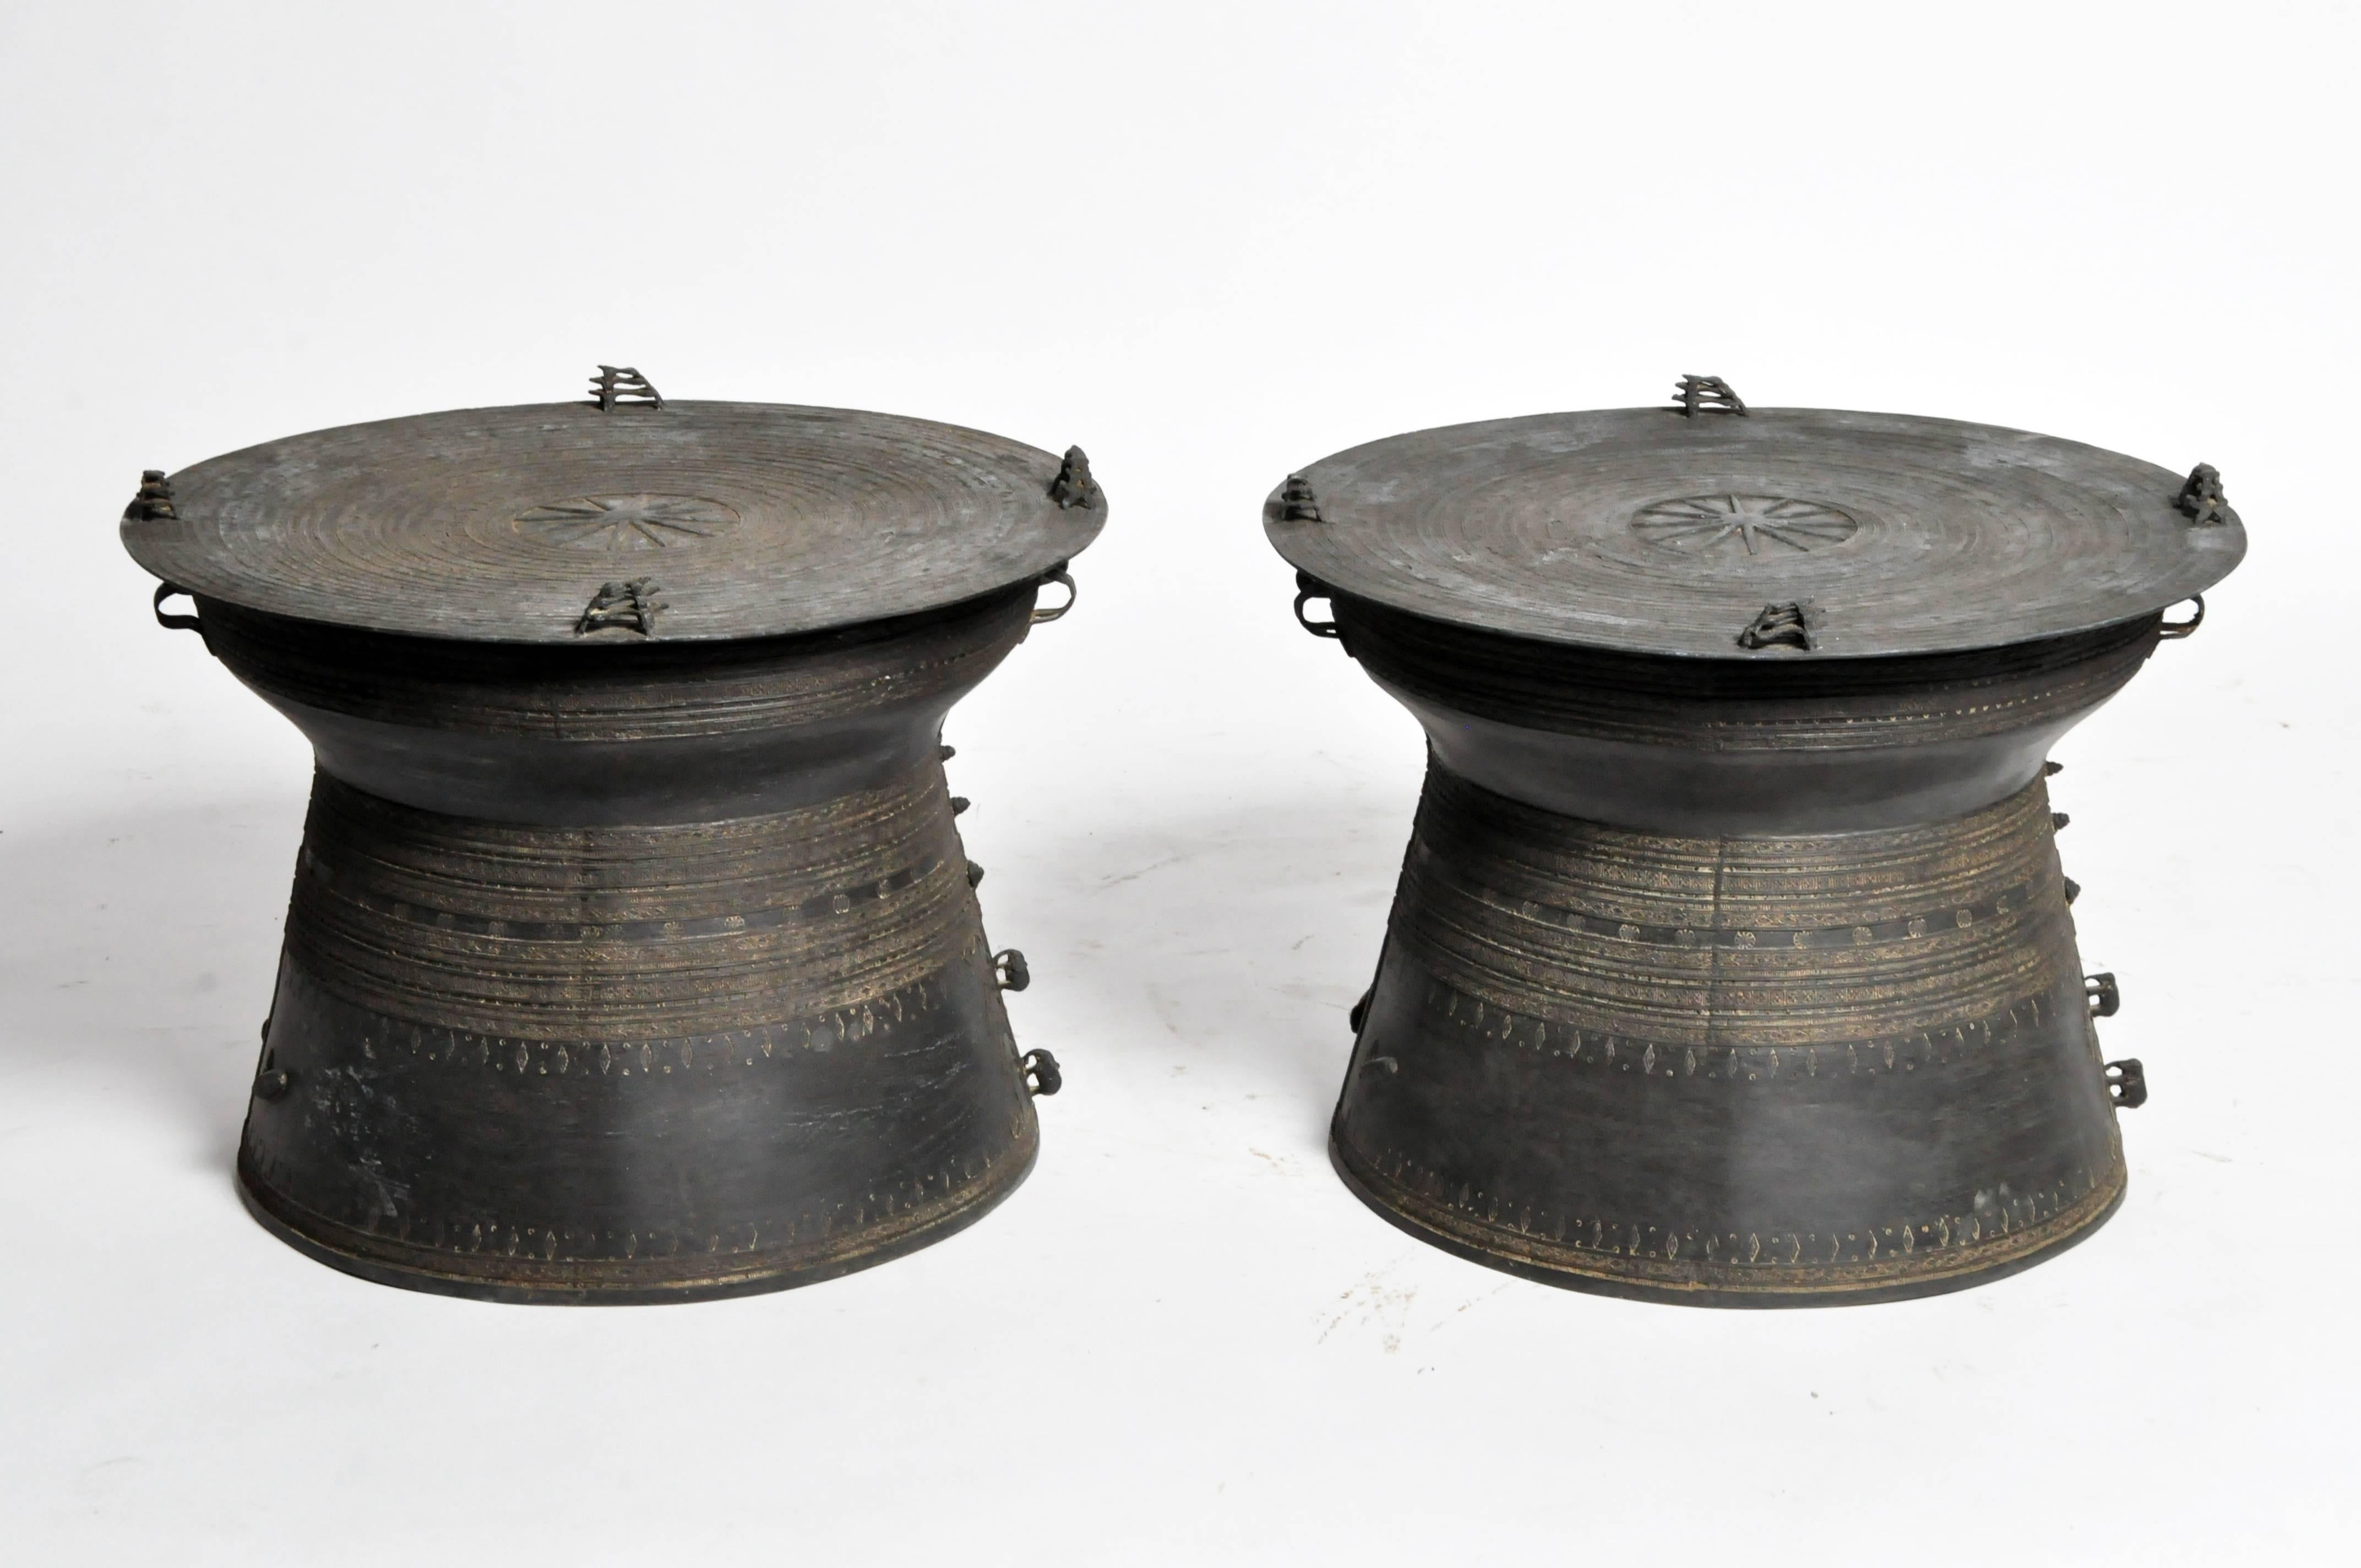 These handsomely patinated drums have circular tops with four double frog-form handles. Decorated with radiating bands and geometric patterns throughout, the waisted bodies are flanked by loop handles while their bases feature large leaf outlines